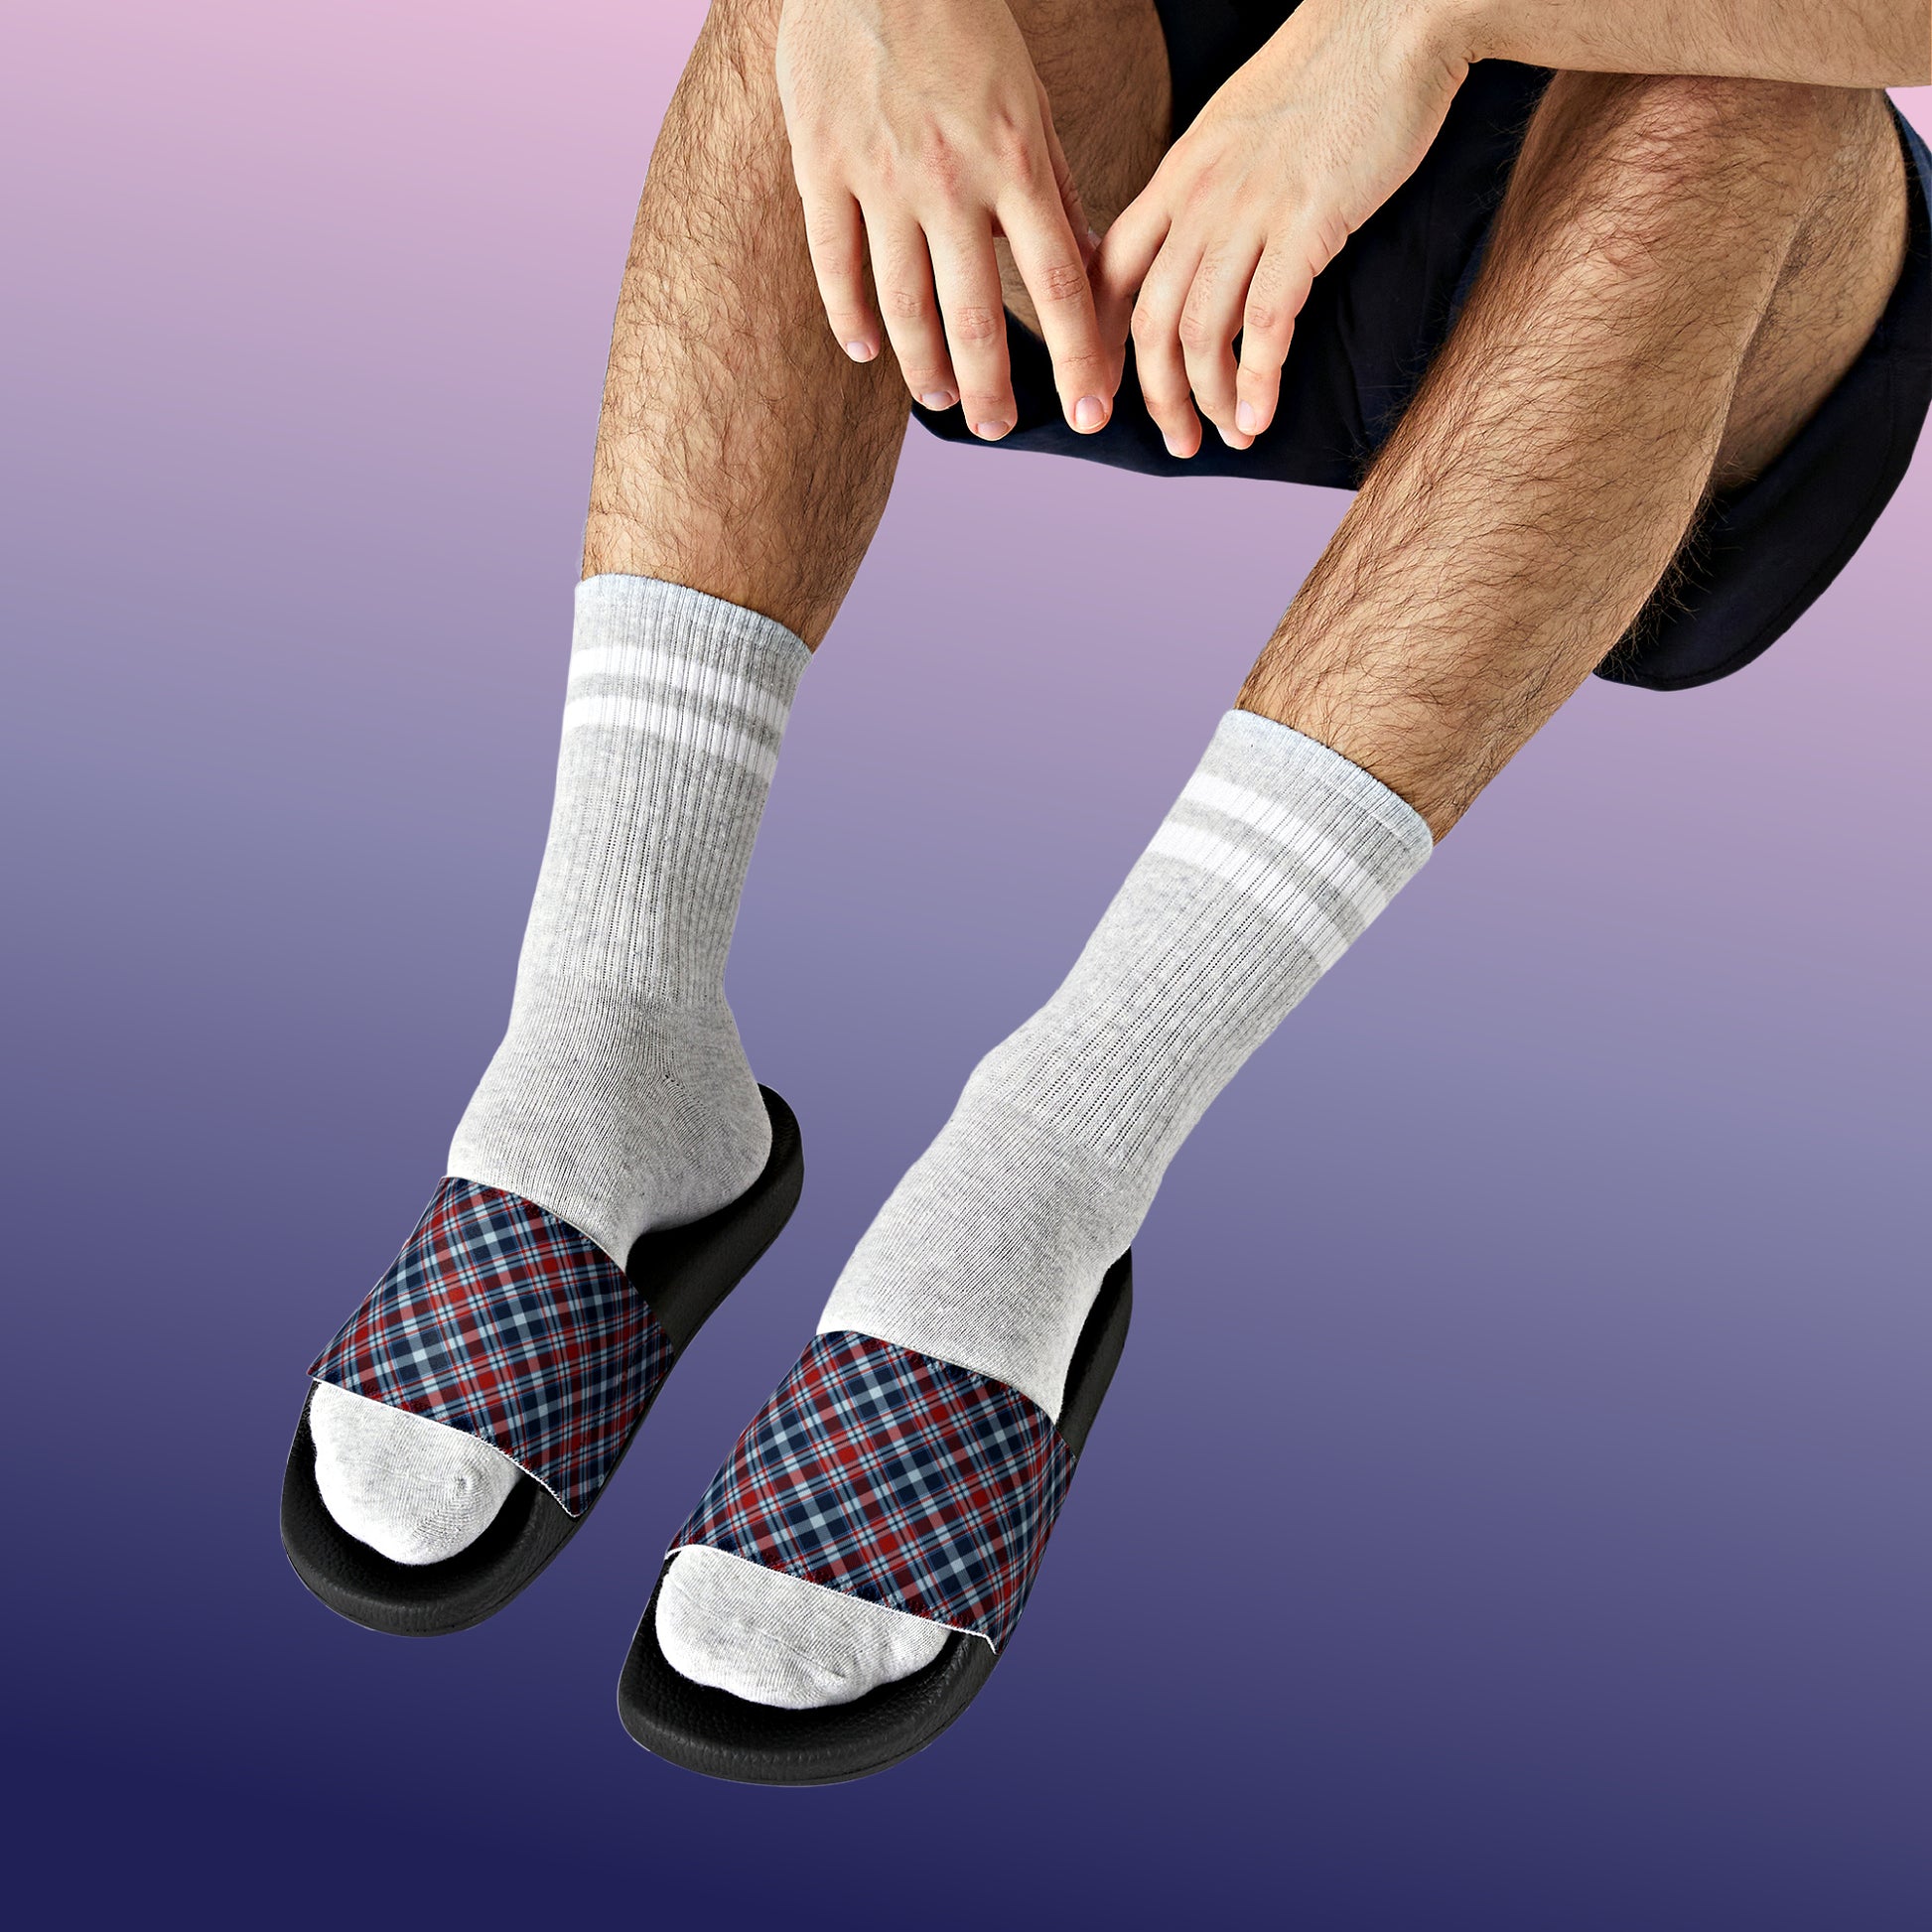 Mock up of a man wearing socks and our sandals